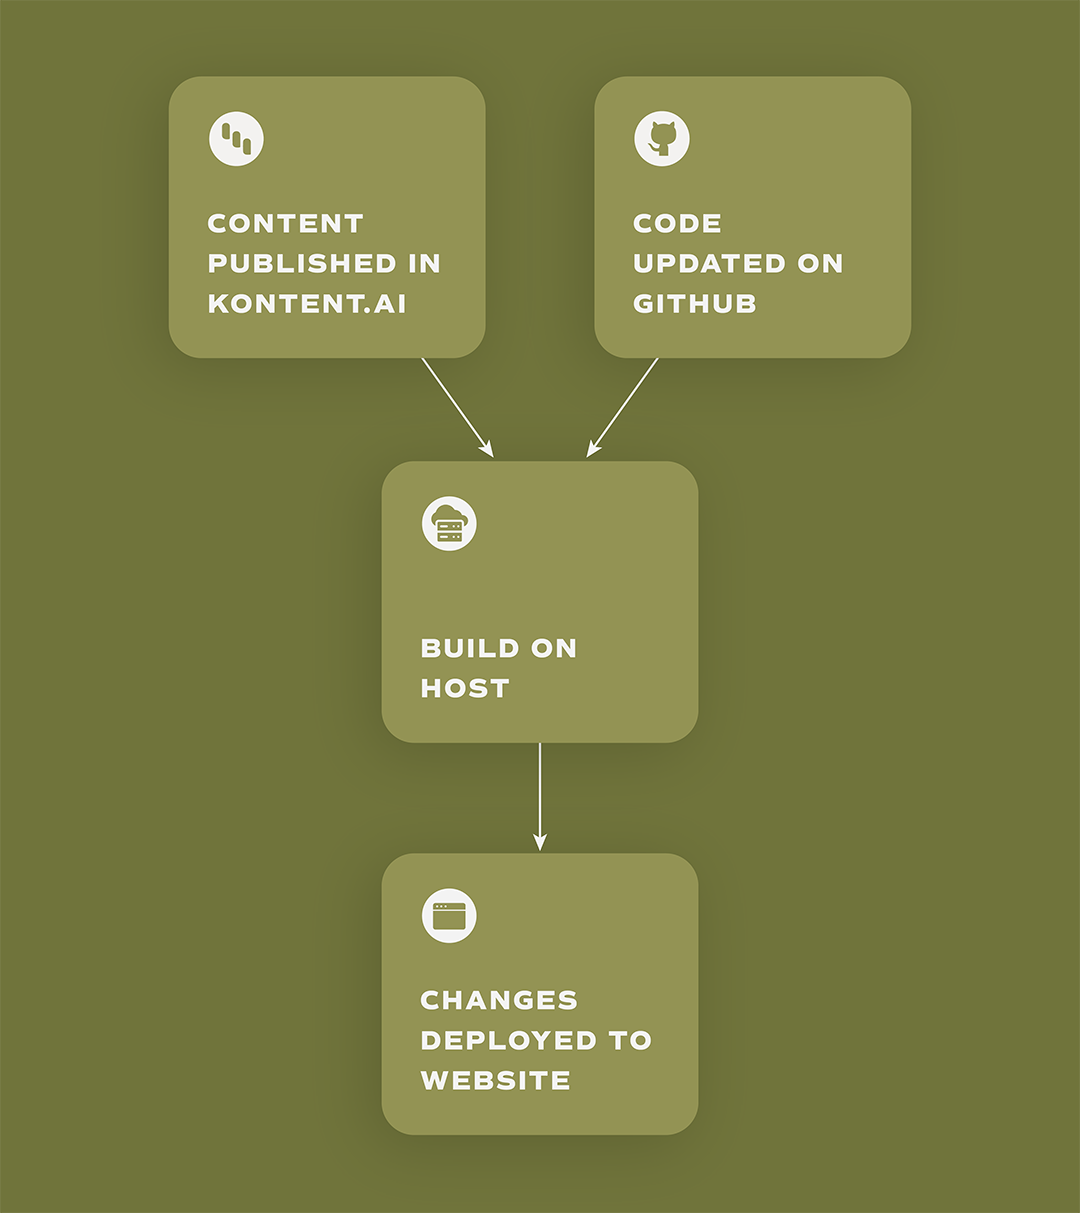 A diagram showing how content published on the headless CMS platform, along with Code being updated on Github, is merged together during build on the Host server which then deploys these changes to the website